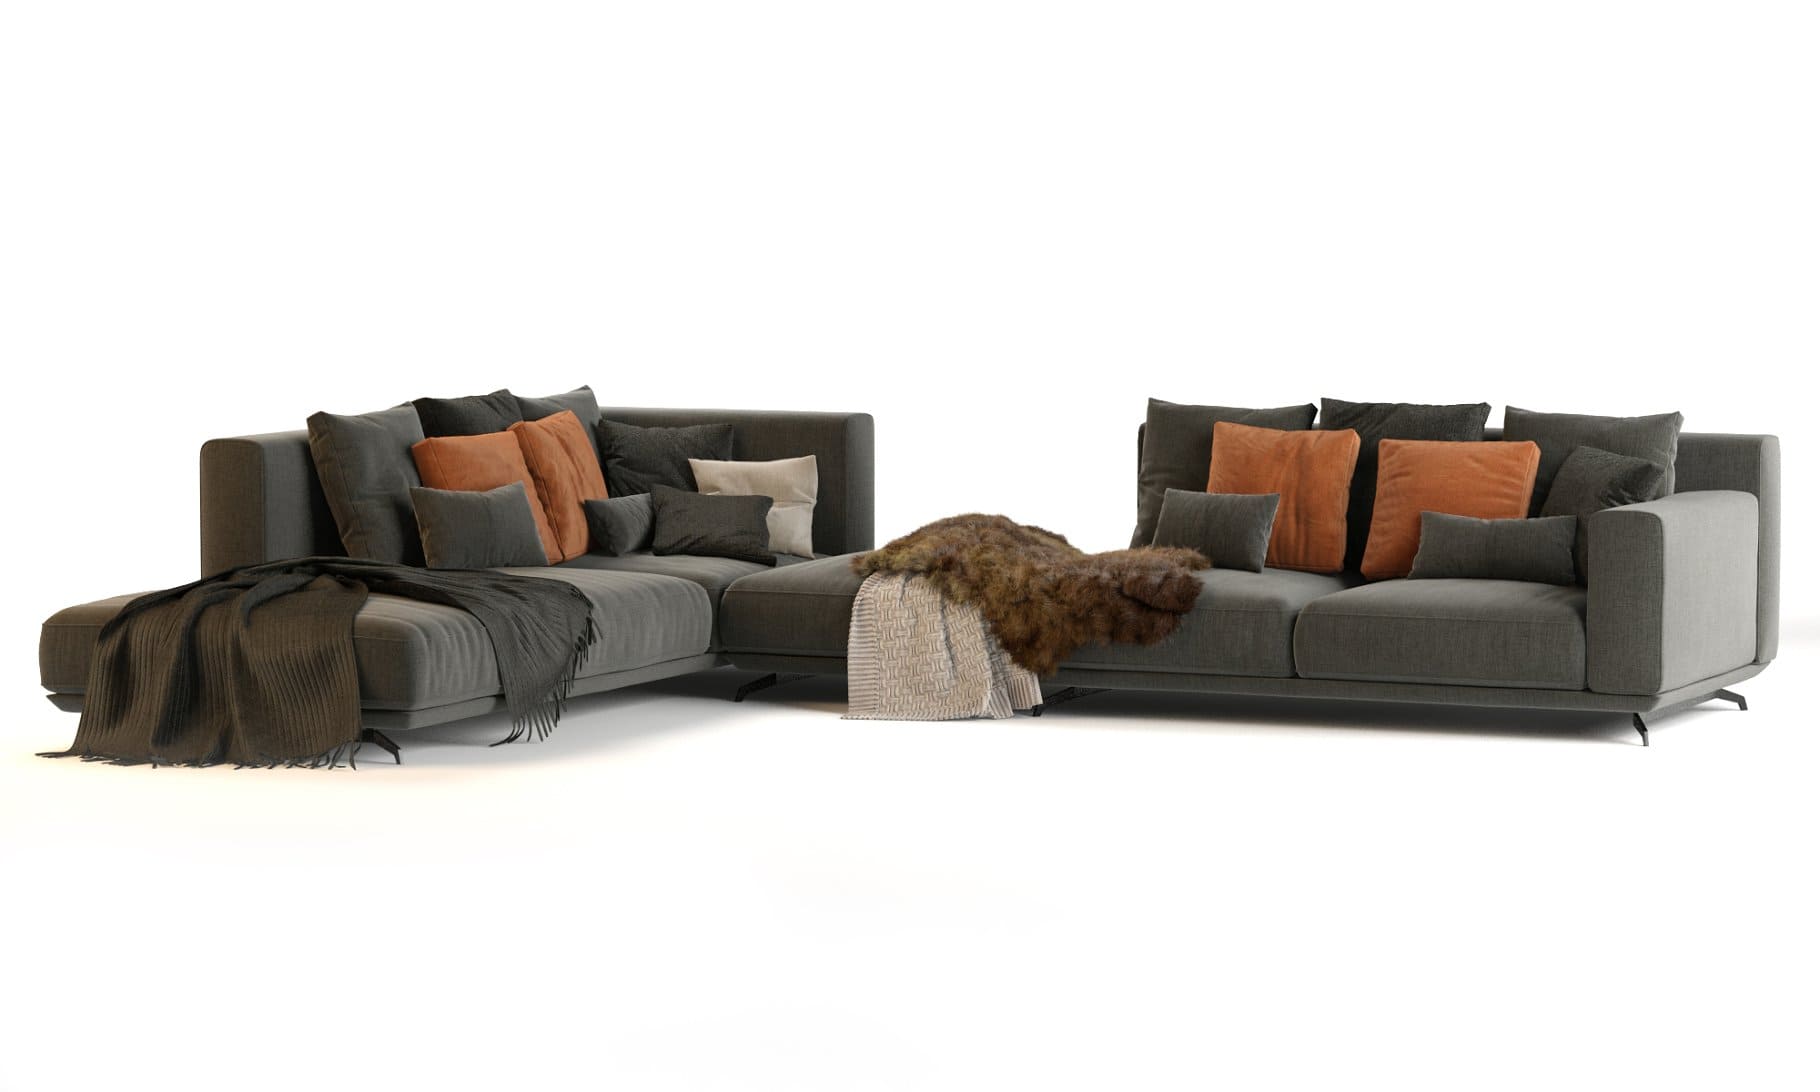 Cashmere and fur blankets on the Dalton Sofa by Ditre Italia.